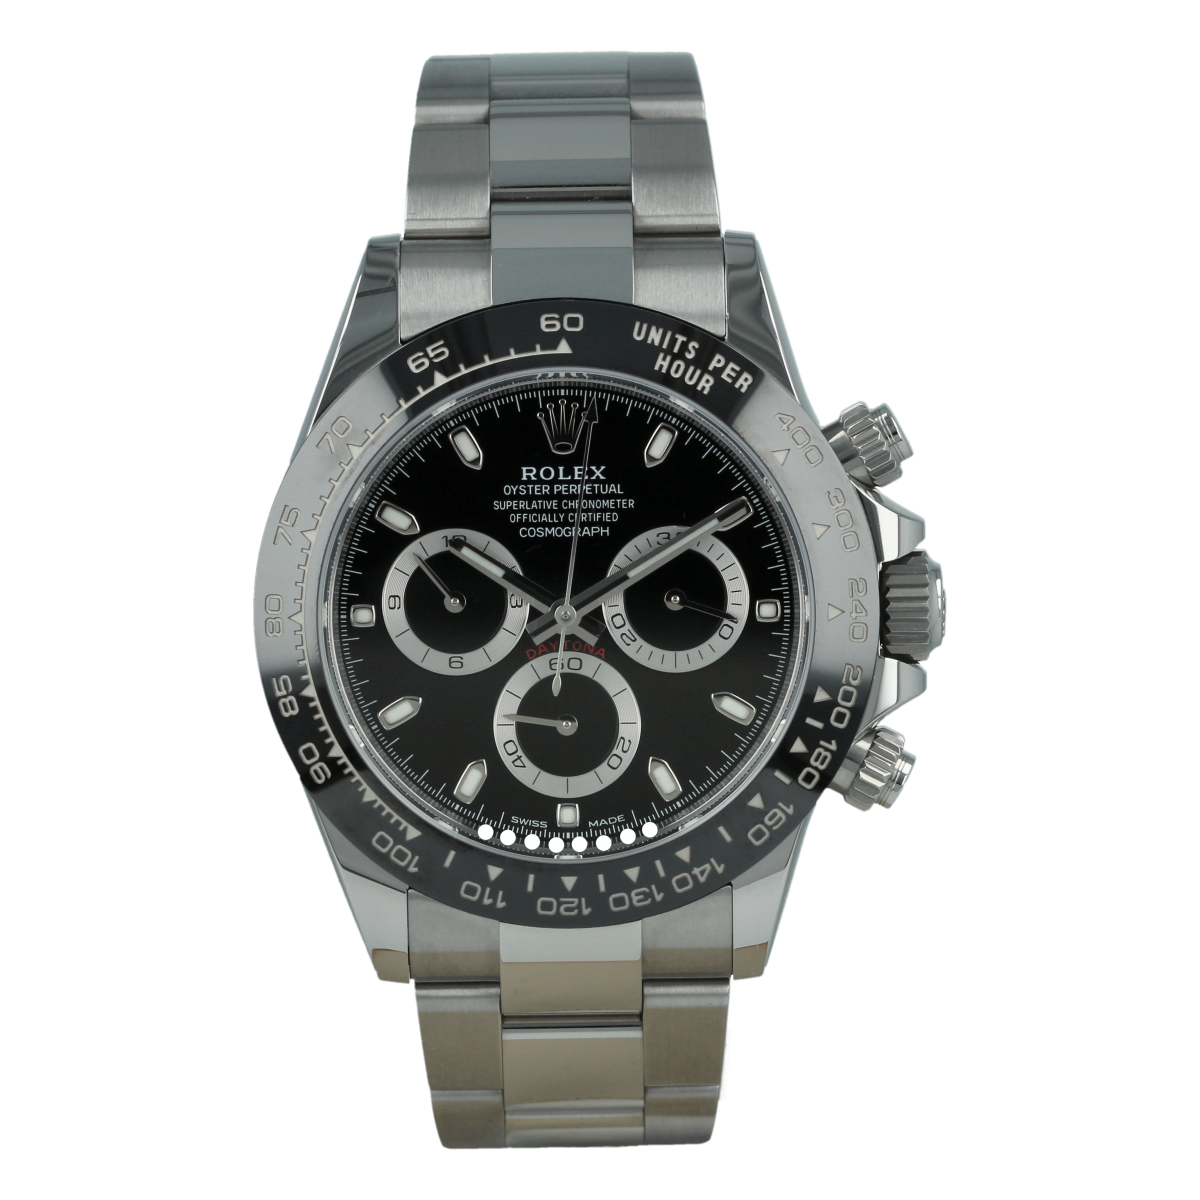 Rolex Cosmograph Daytona 116500LN Black Dial *New* | Buy pre-owned Rolex watch